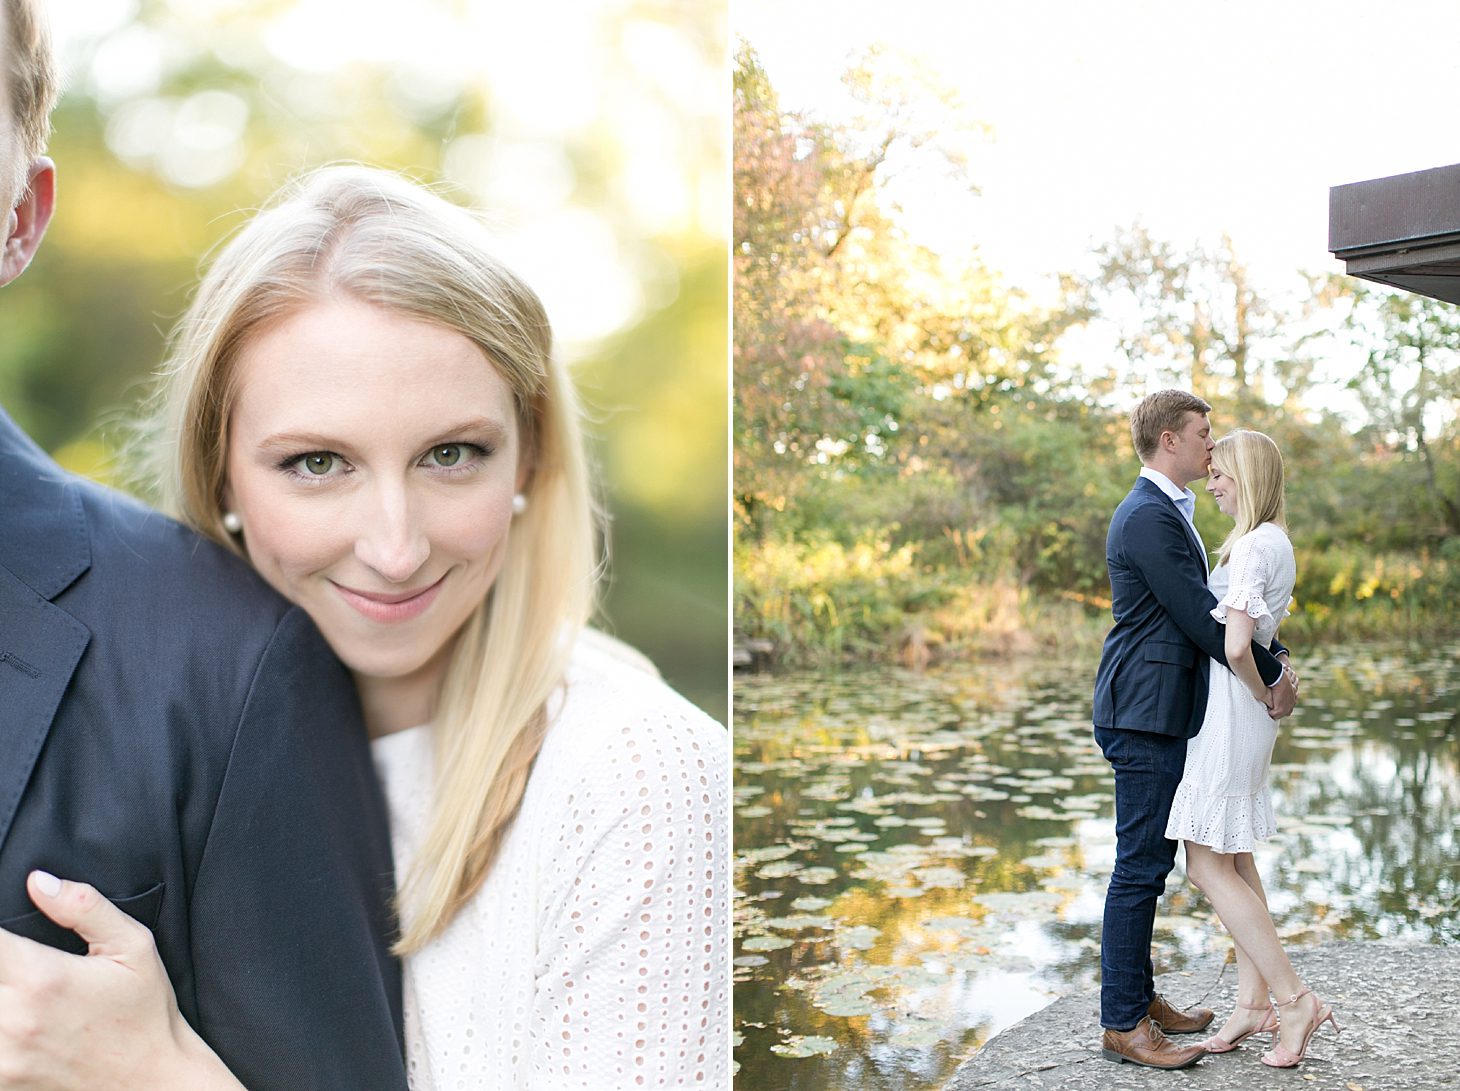 Lily Pond Chicago Engagement Photos_0008-1